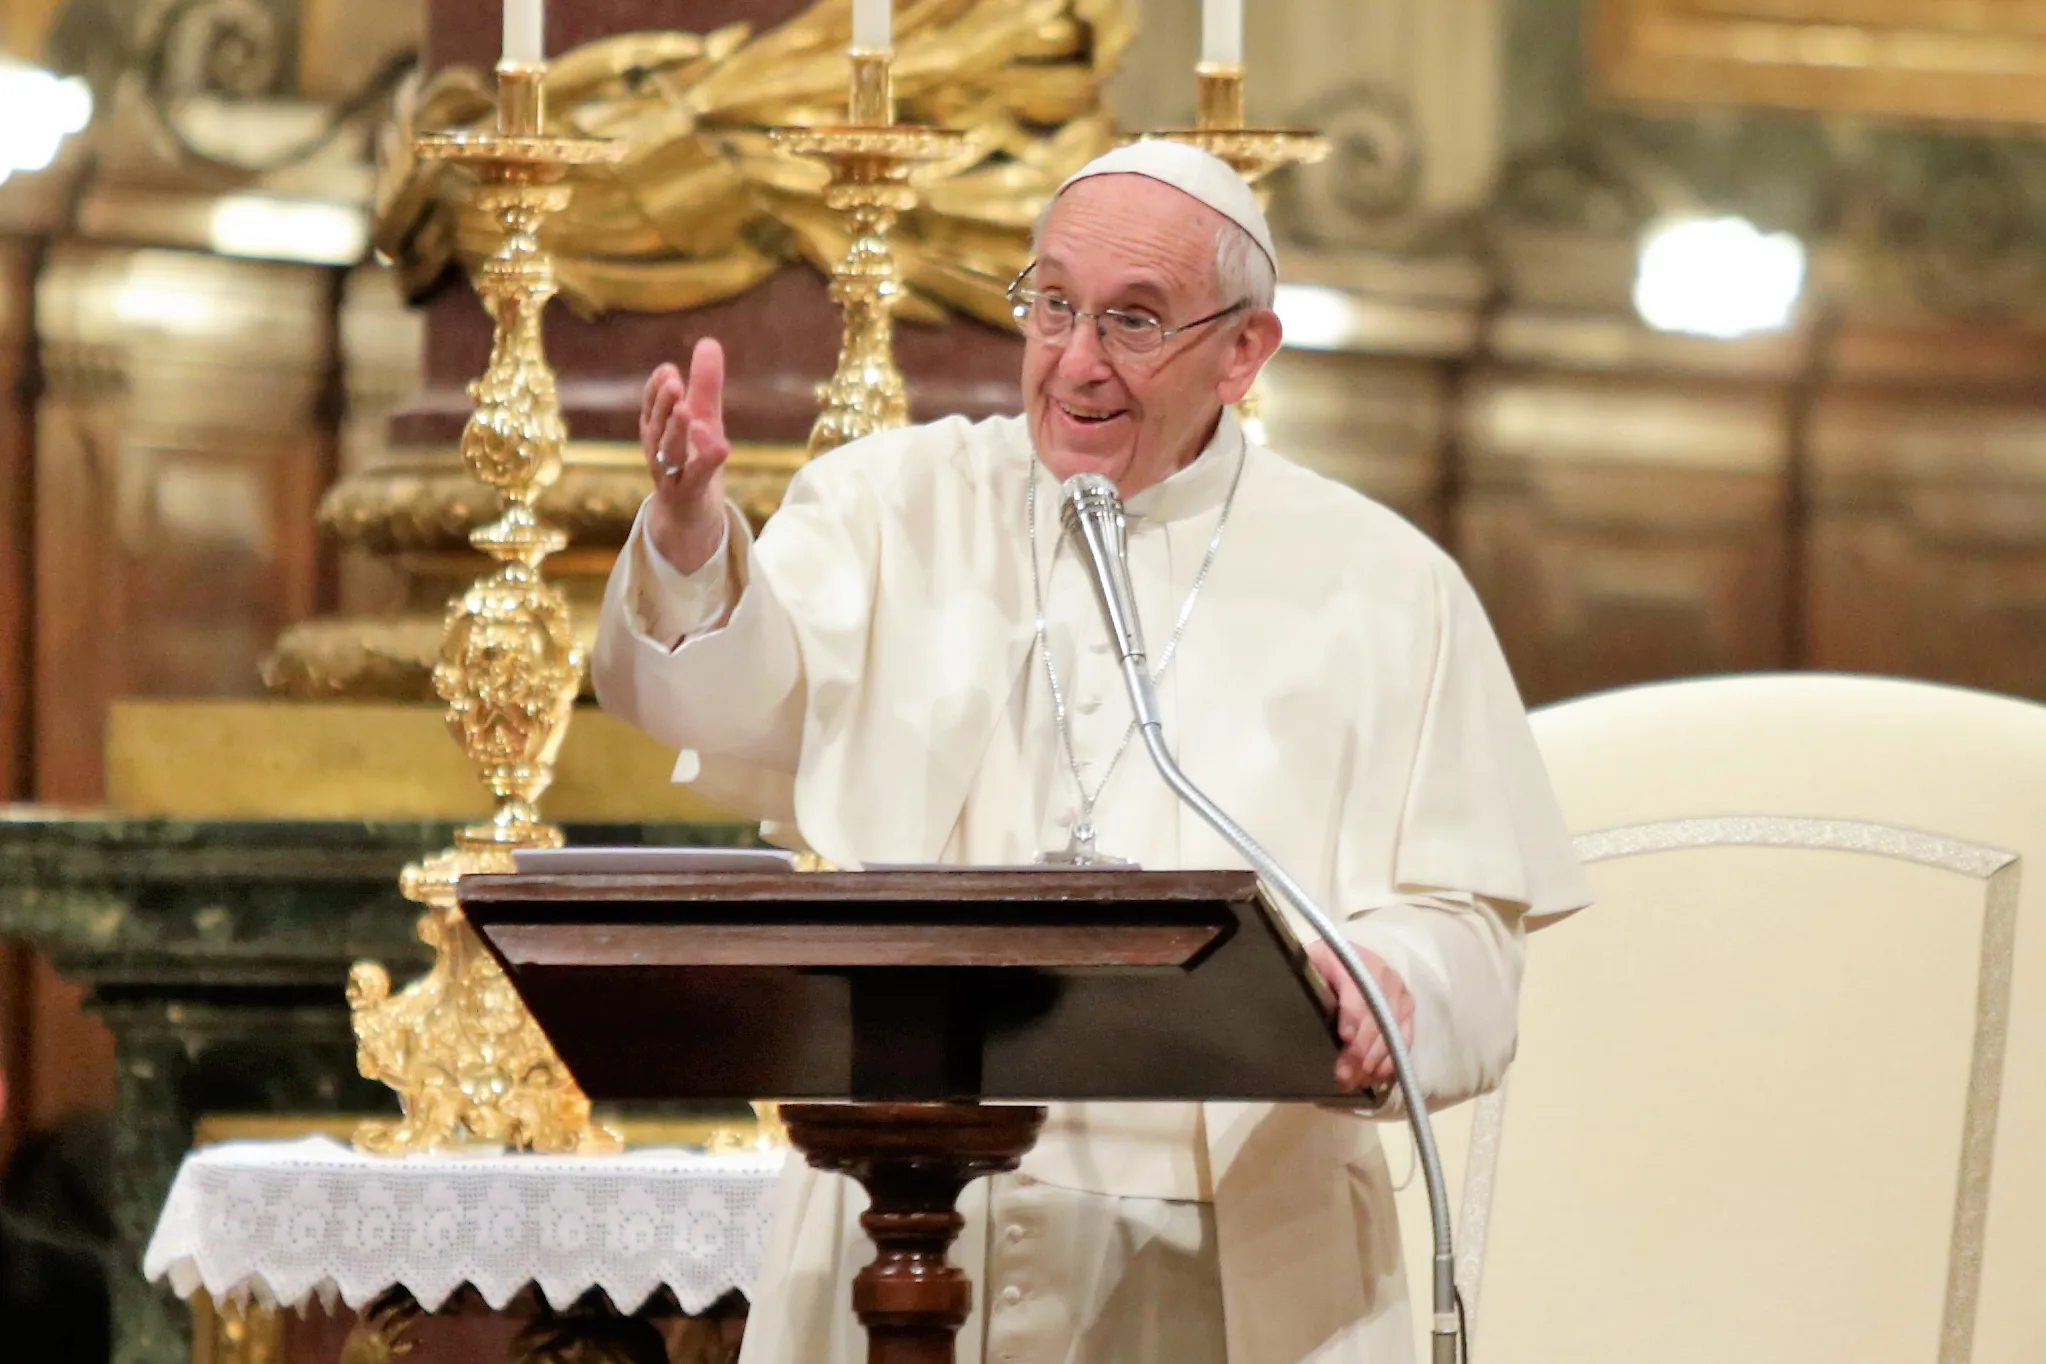 Pope Francis speaks to young people at the Basilica of Saint Mary Major in Rome. ?w=200&h=150